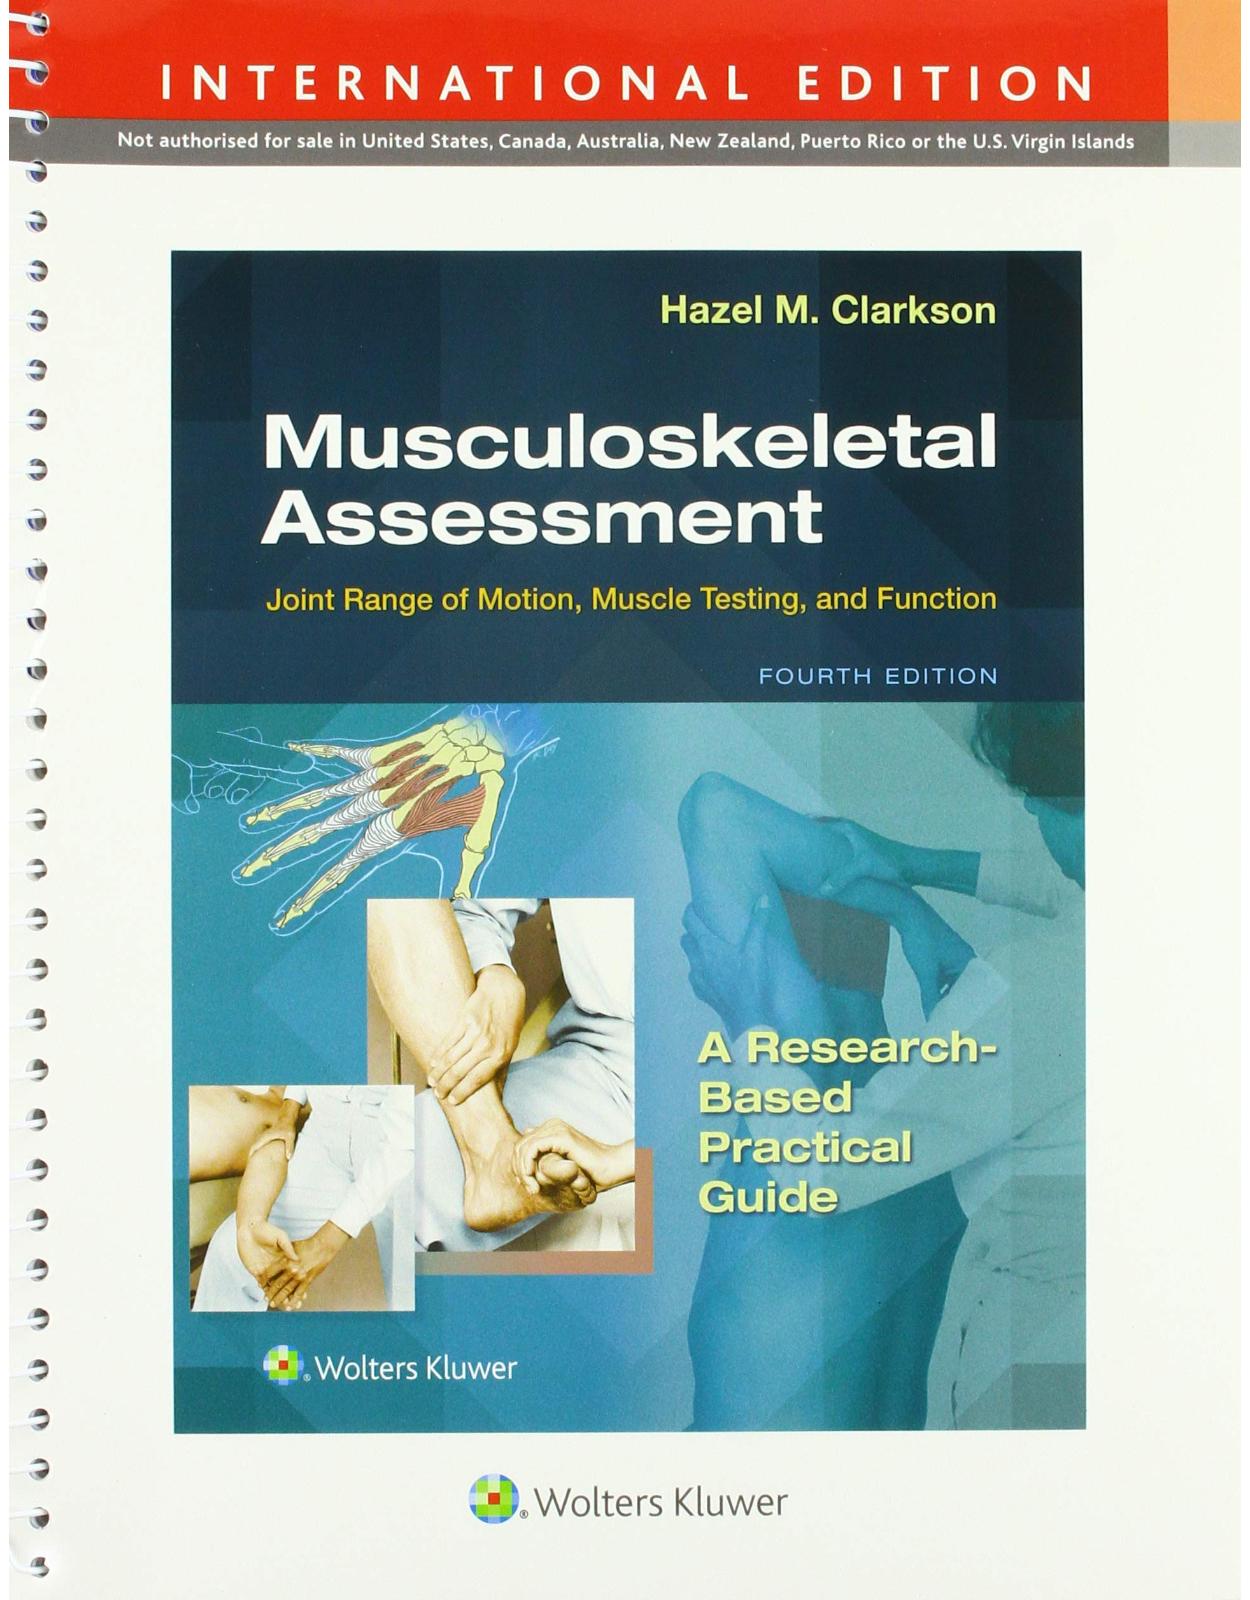 Musculoskeletal Assessment: Joint Range of Motion, Muscle Testing, and Function